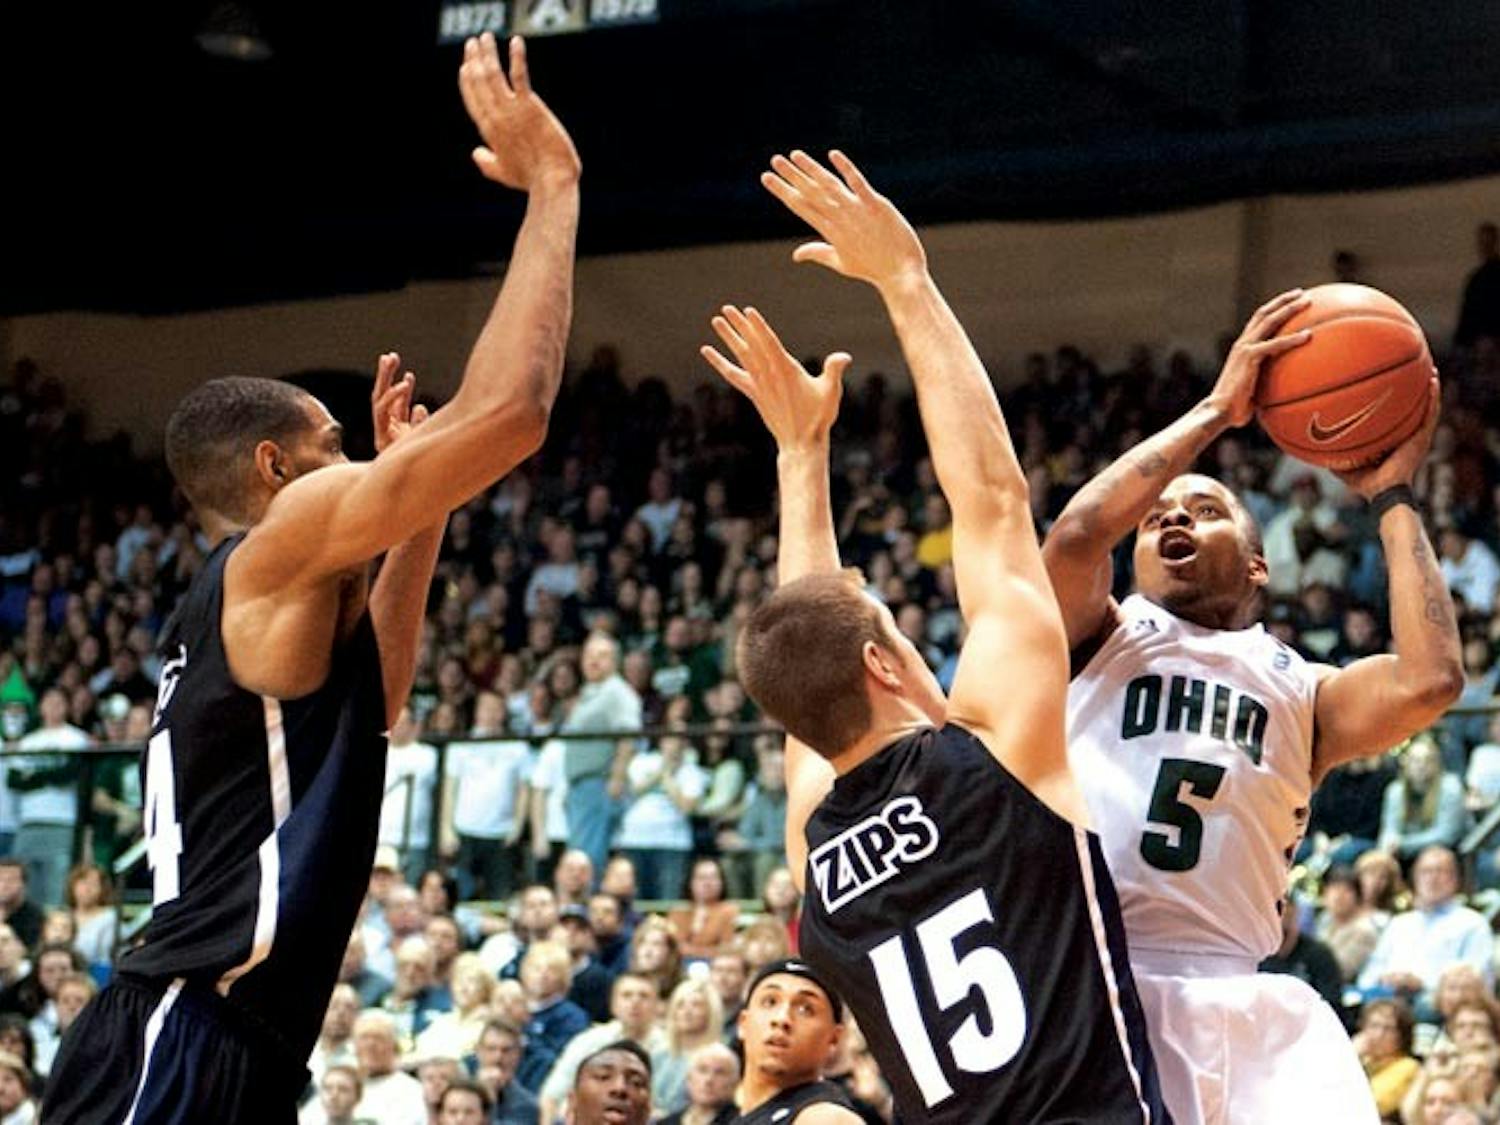 Men's Basketball: Akron ousts Ohio to remain unbeaten in MAC play  